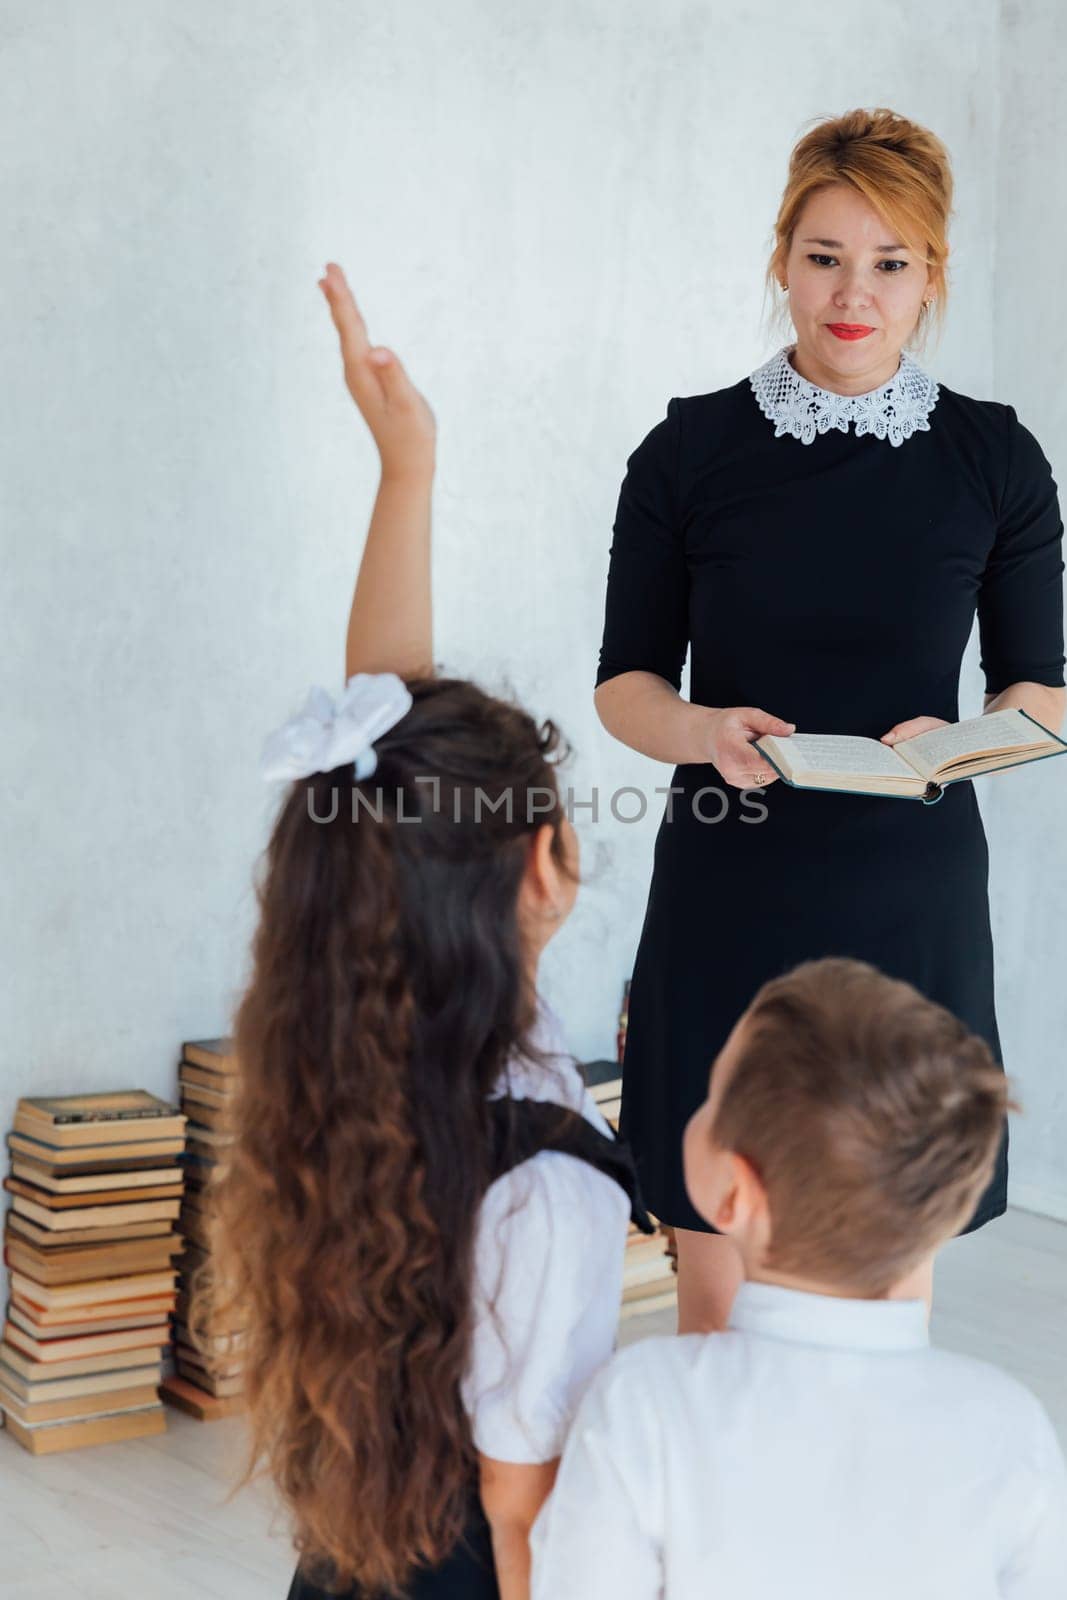 teacher at lesson at school with children and books